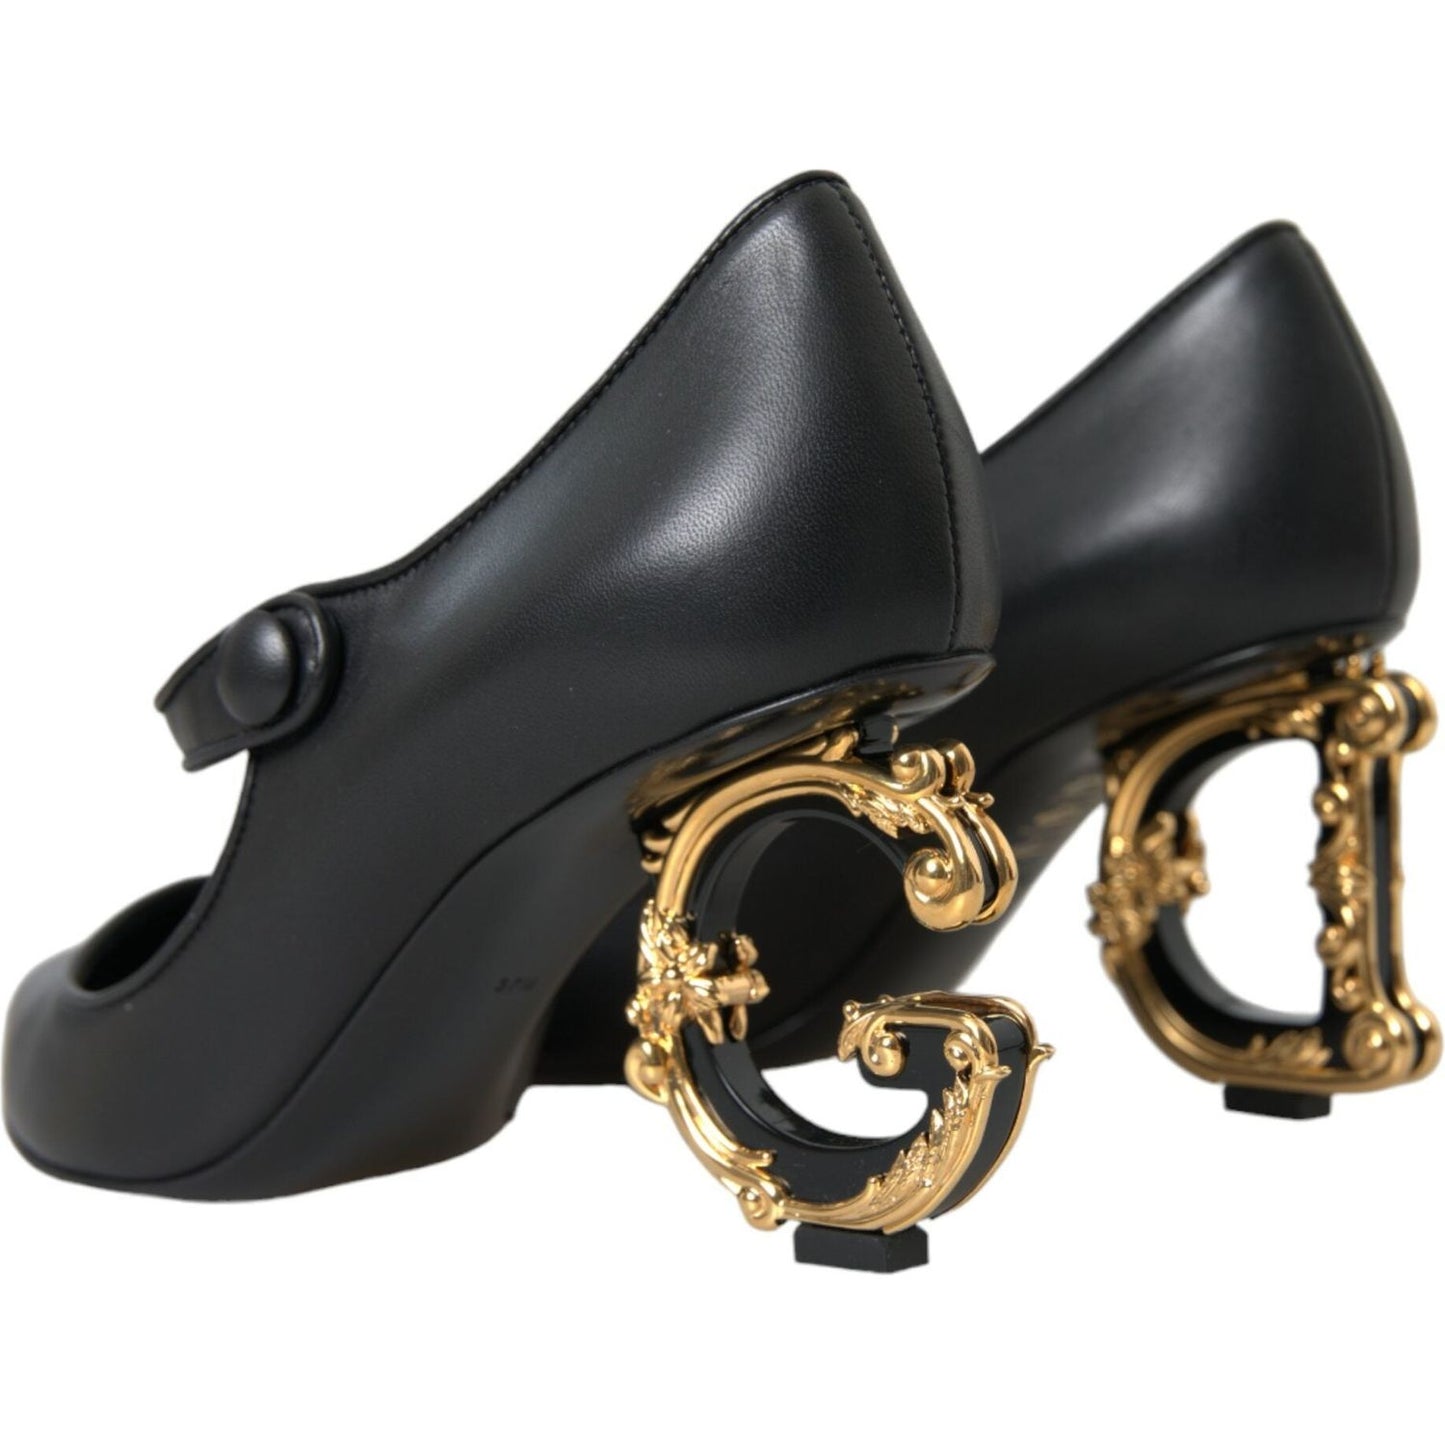 Dolce & Gabbana Black Leather Logo Heels Mary Janes Pumps Shoes black-leather-logo-heels-mary-janes-pumps-shoes